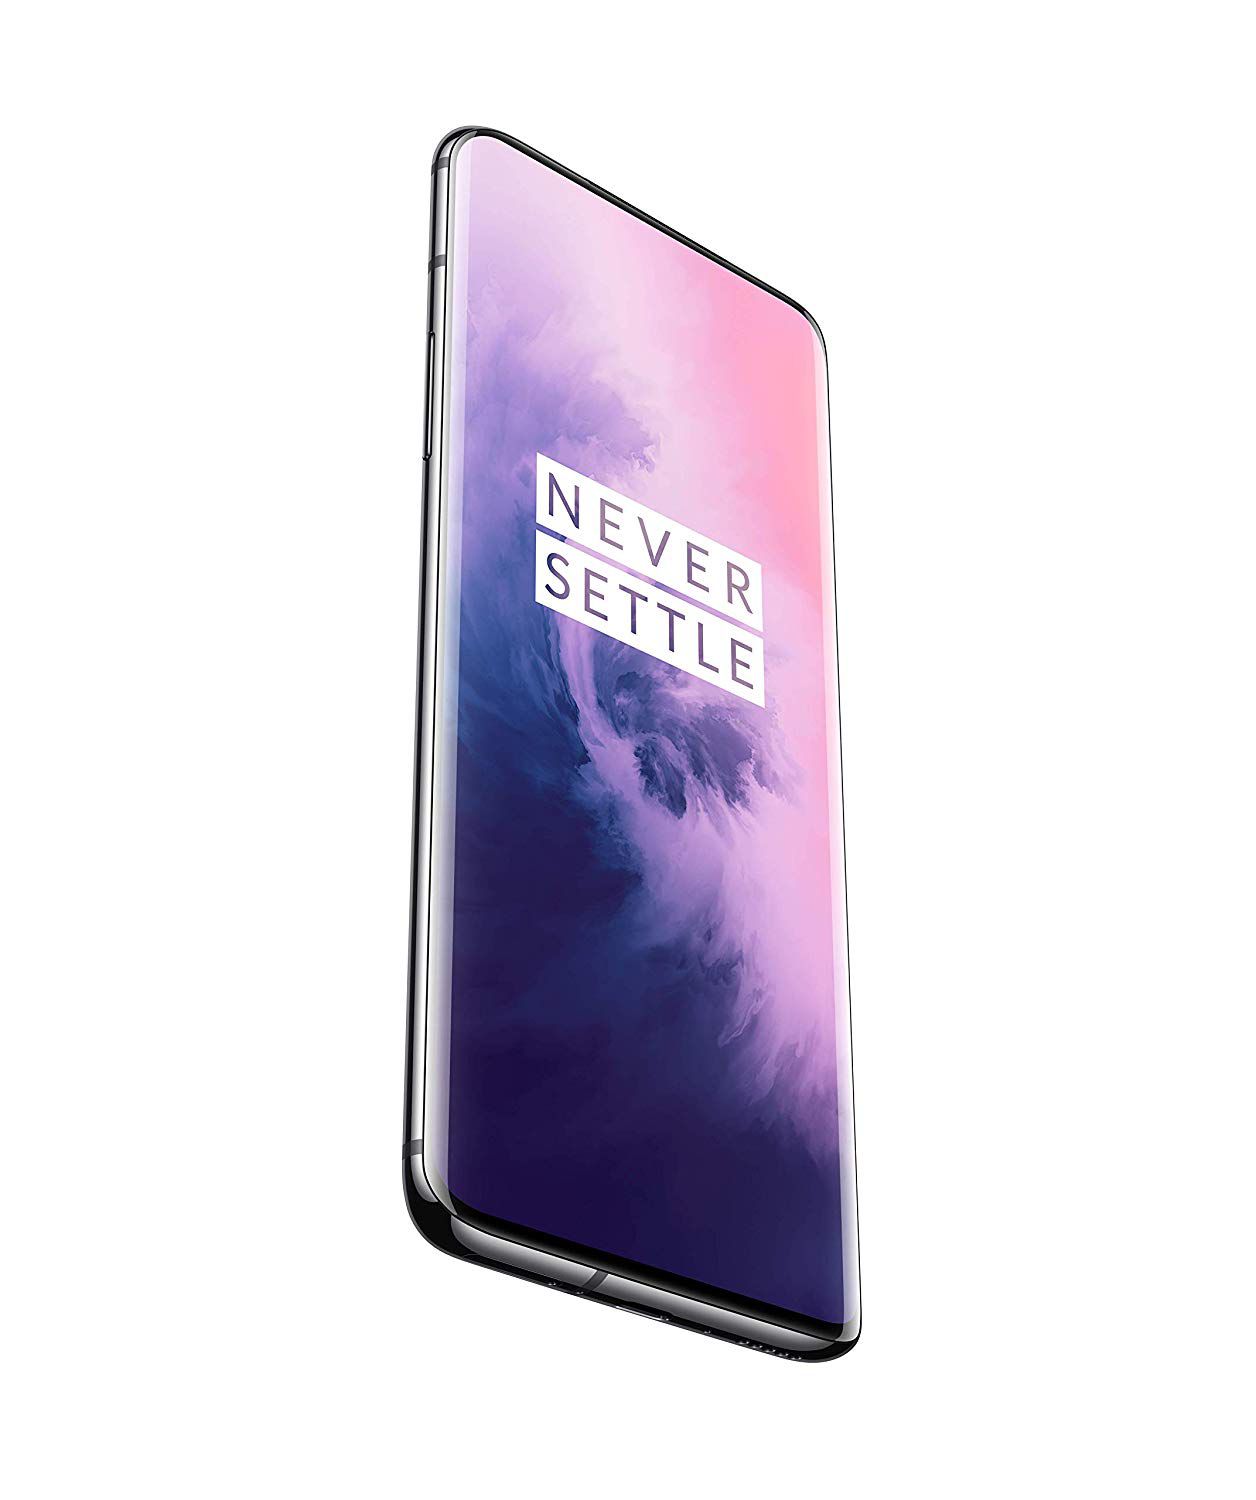 OnePlus 7 Pro Price, Review, Features, Specification